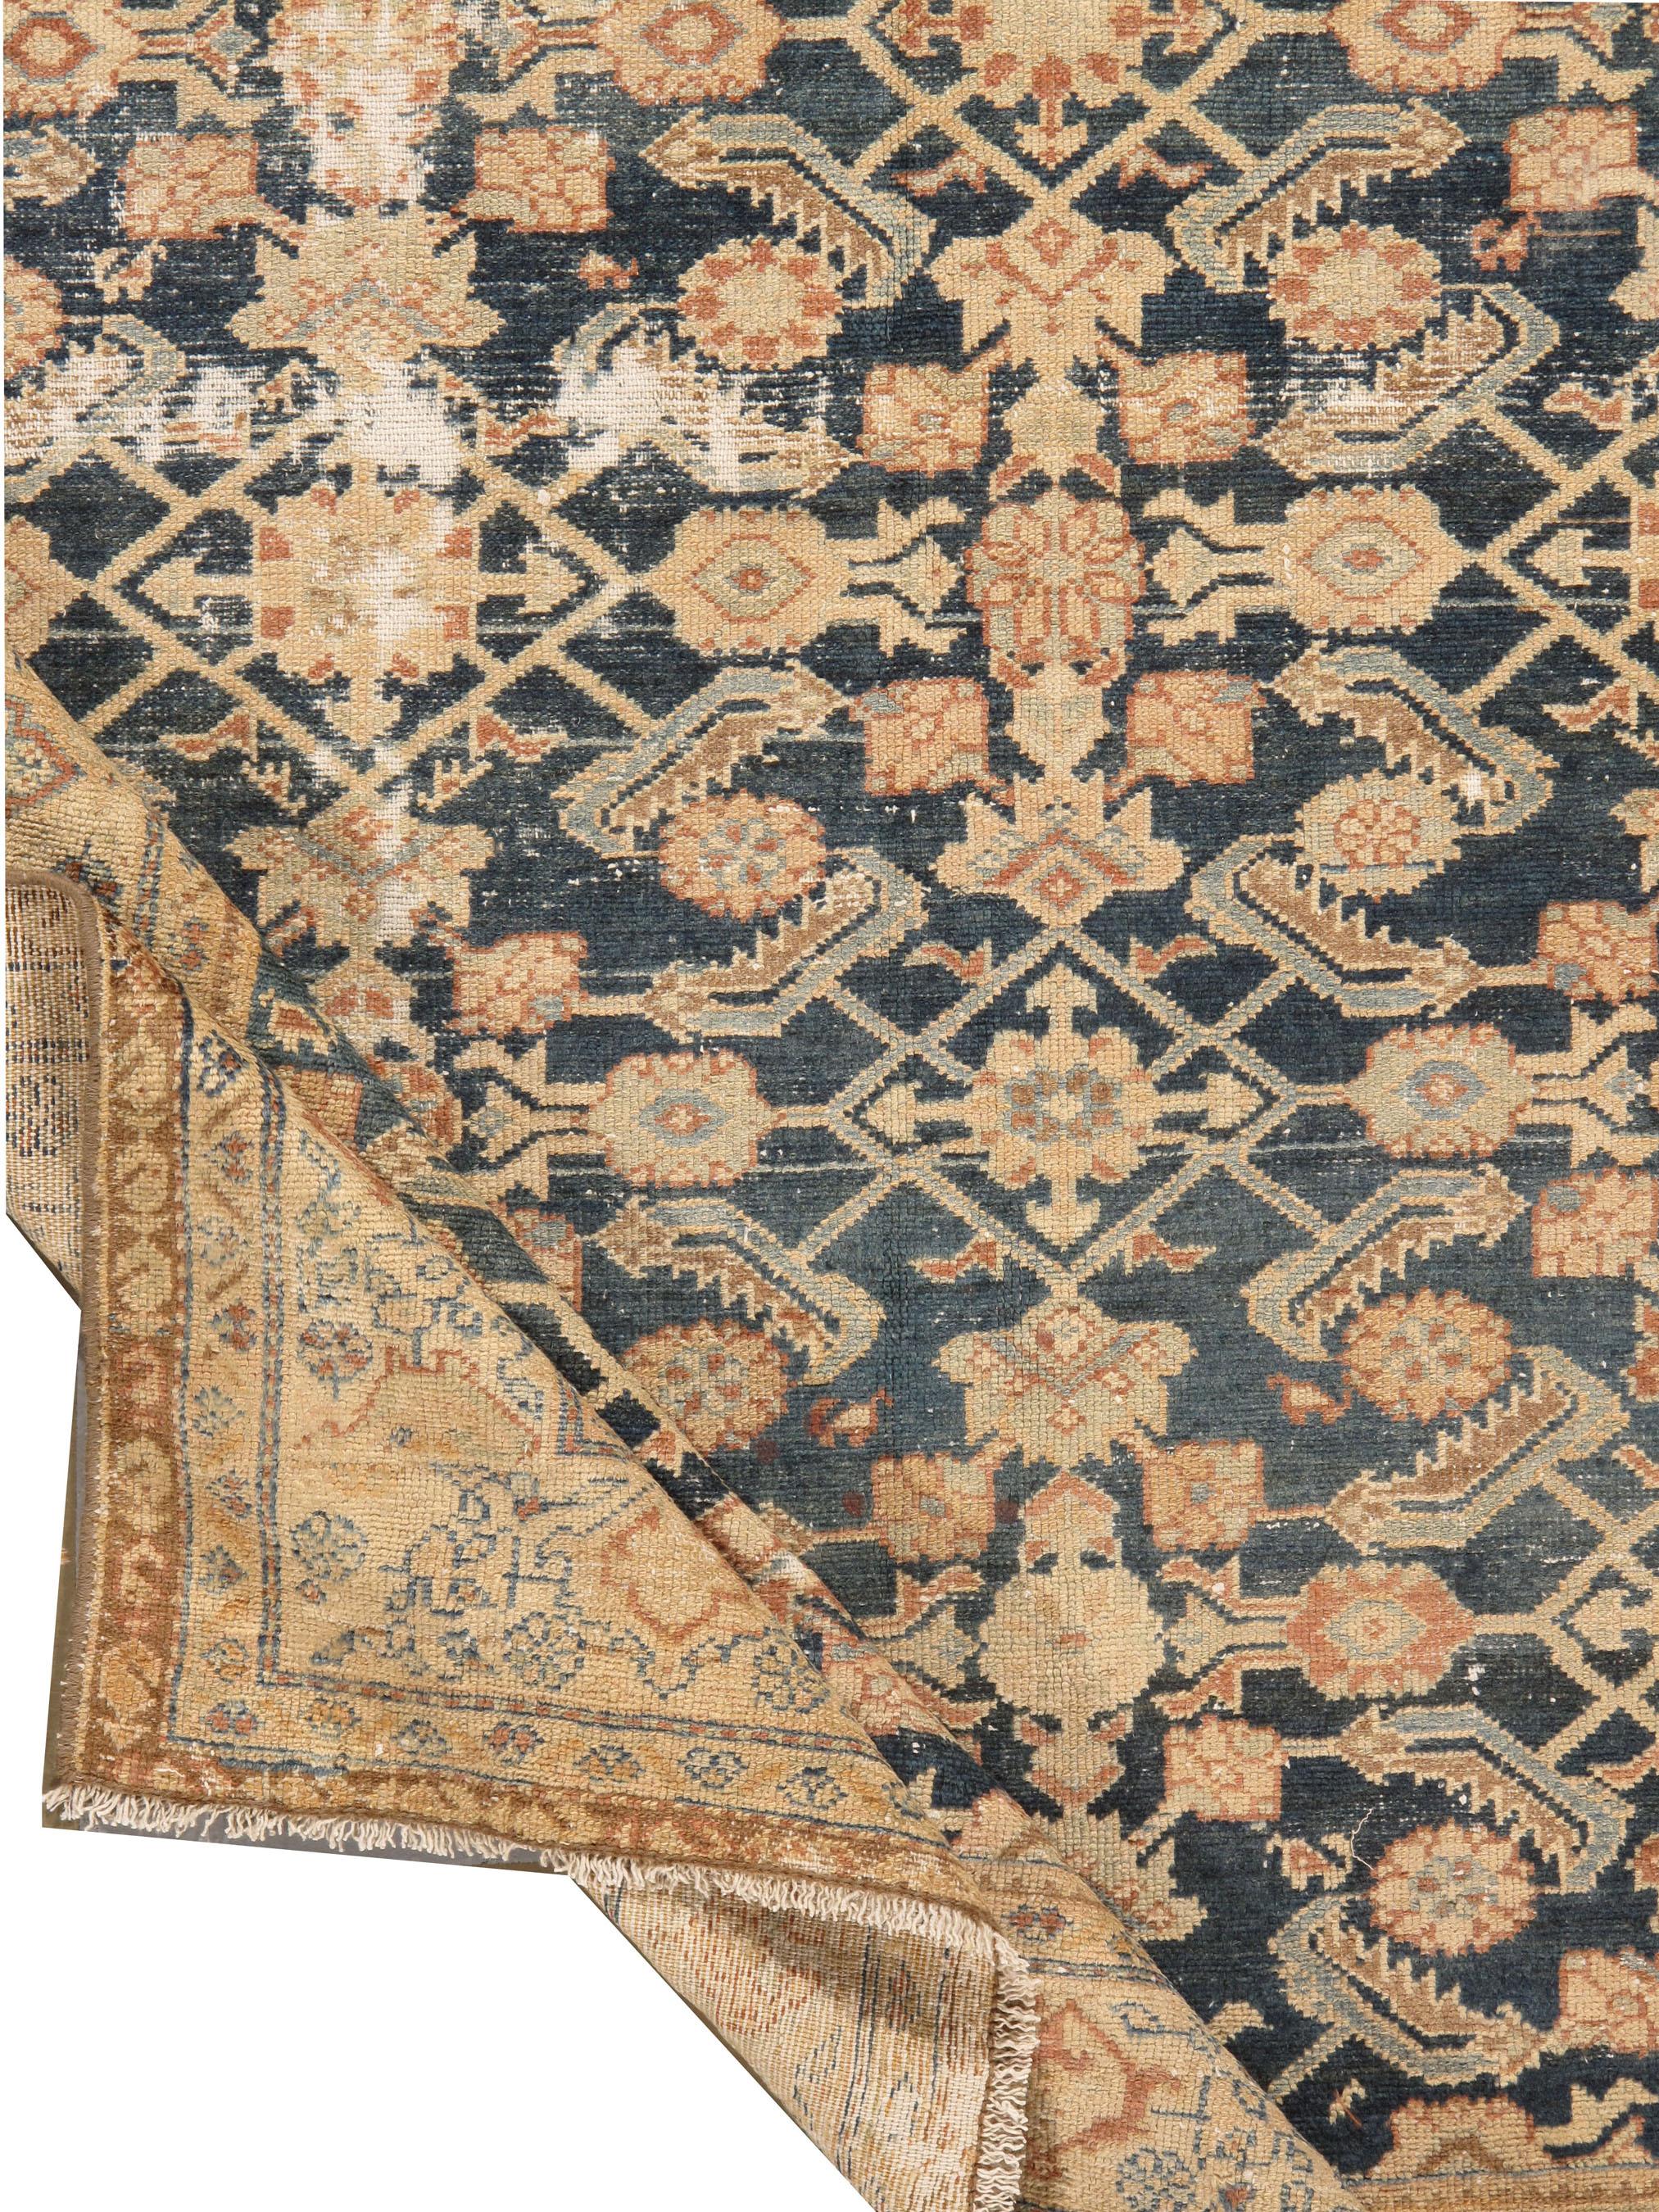 Wool Antique Slightly Distressed Persian Malayer Rug, circa 1900  4'4 x 5'5 For Sale